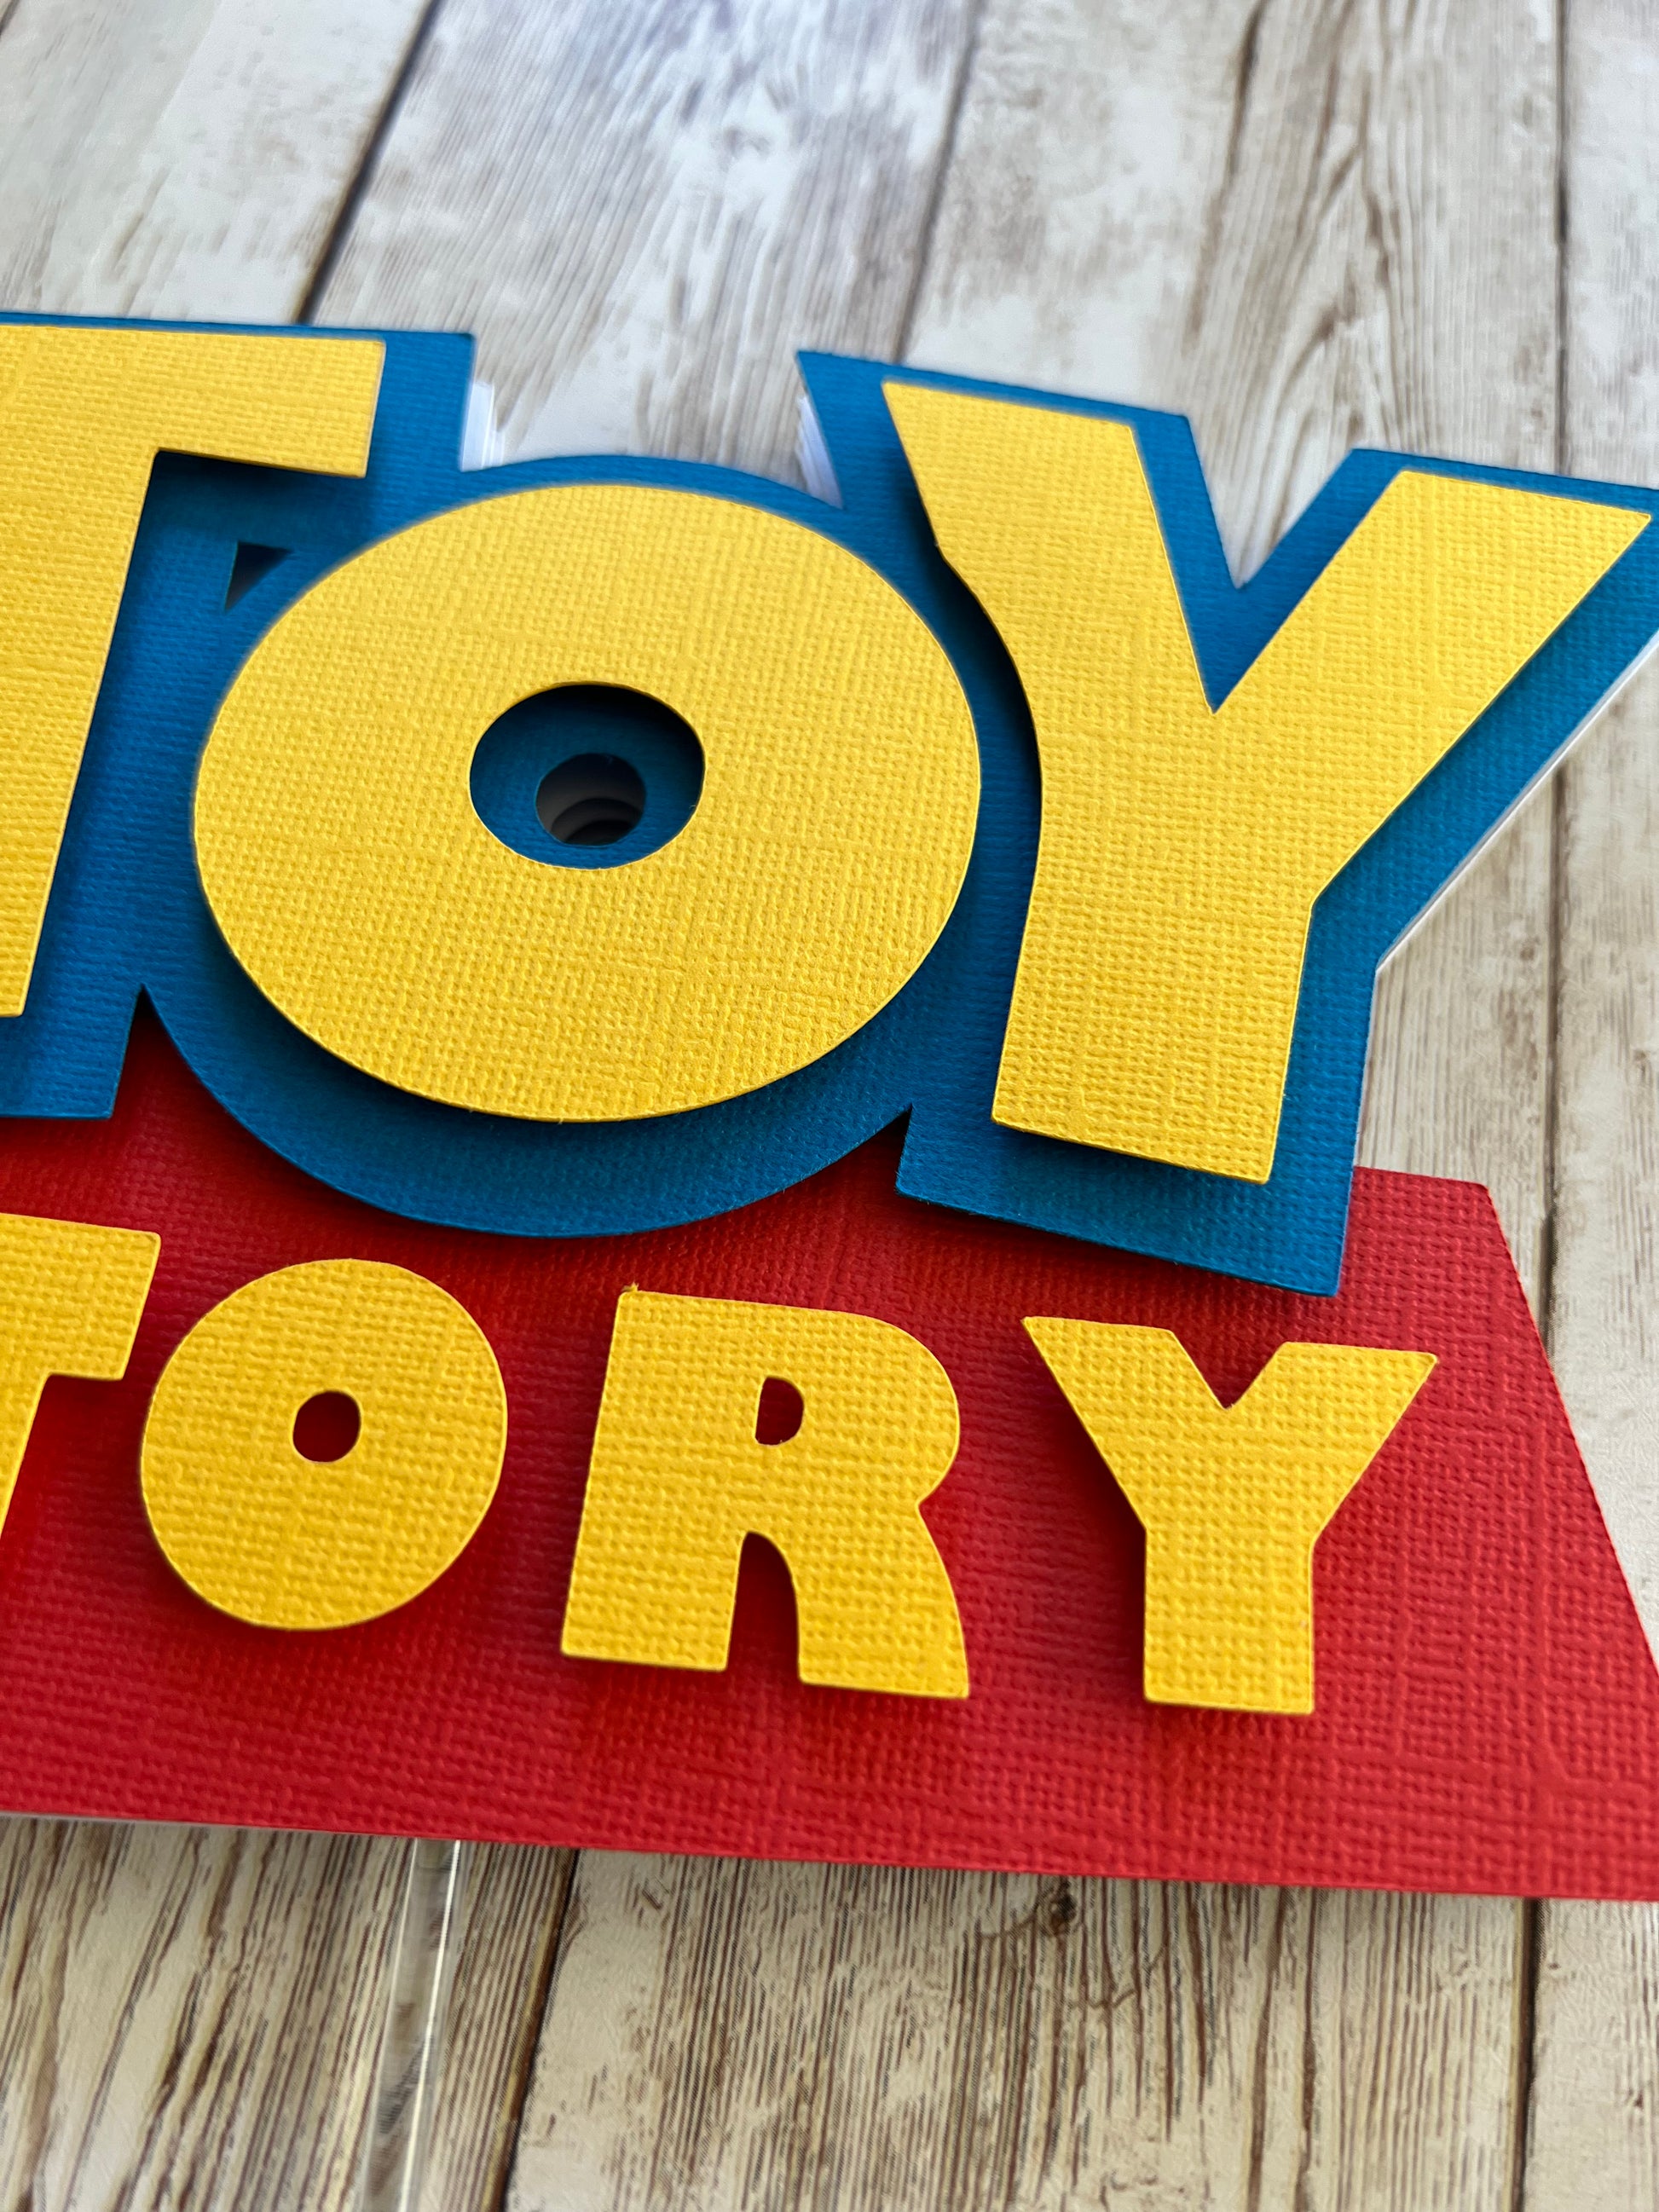 Toy Story cake topper